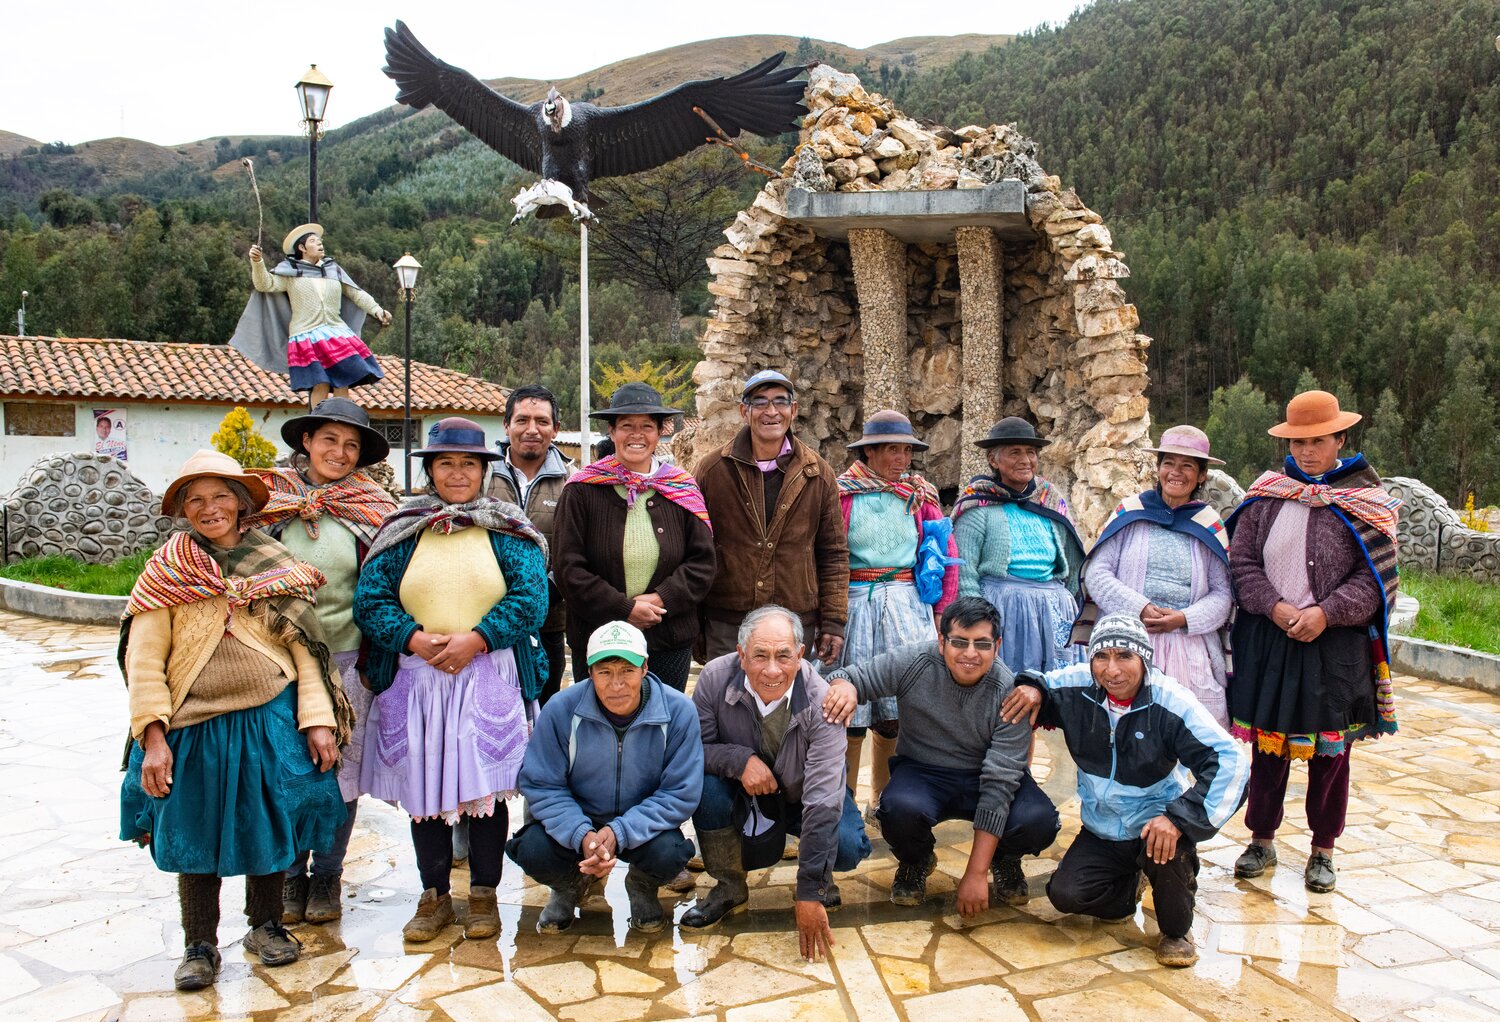 Members of the Colpar community in the highlands of central Peru. Photo: Crop Trust/Michael Major.